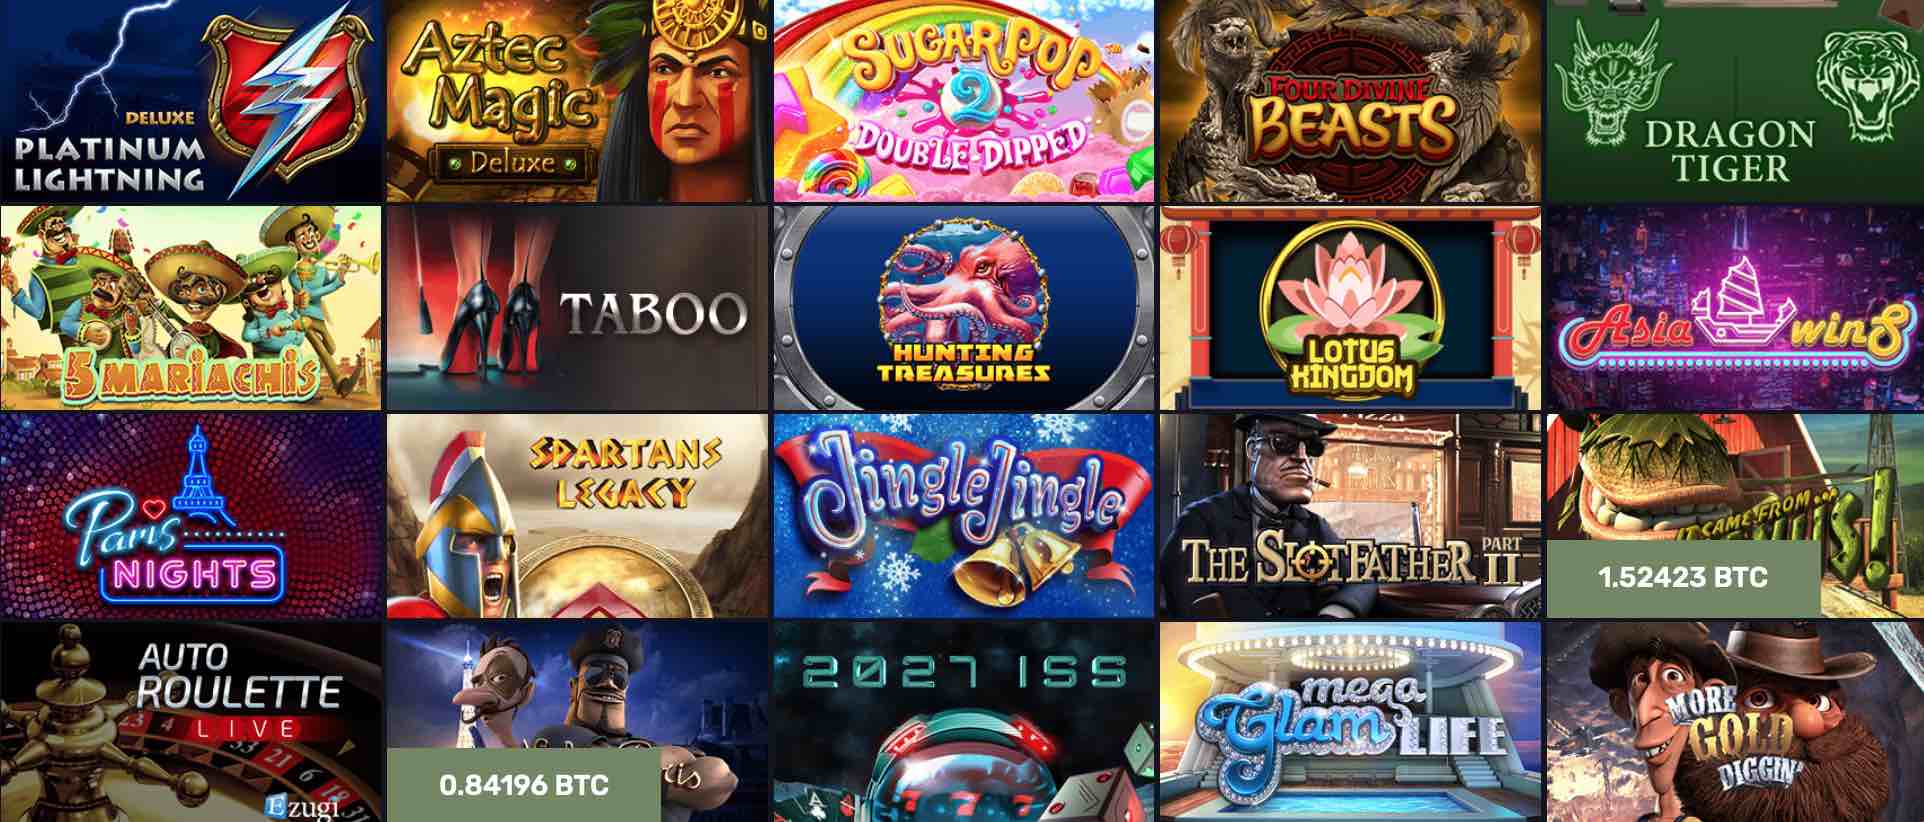 Golden palace 50 free spins